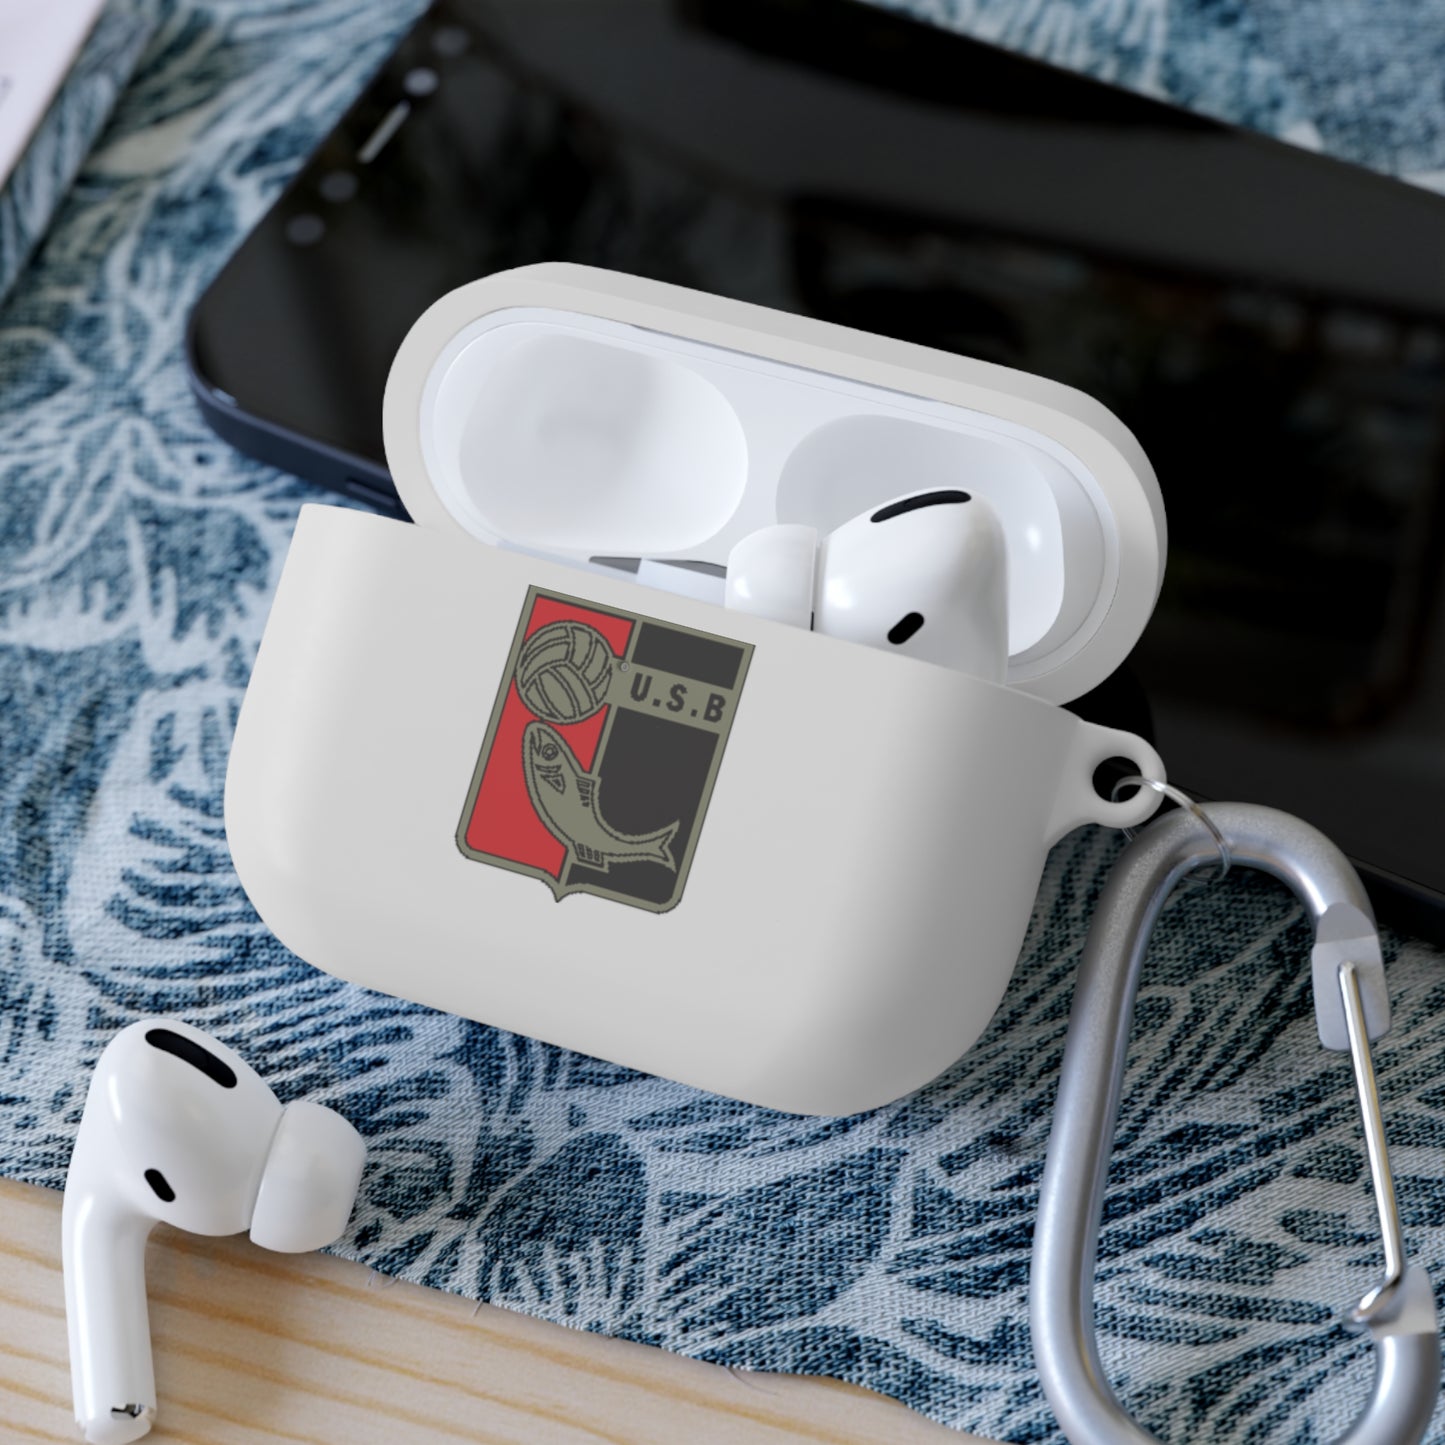 US Boulogne AirPods and AirPods Pro Case Cover